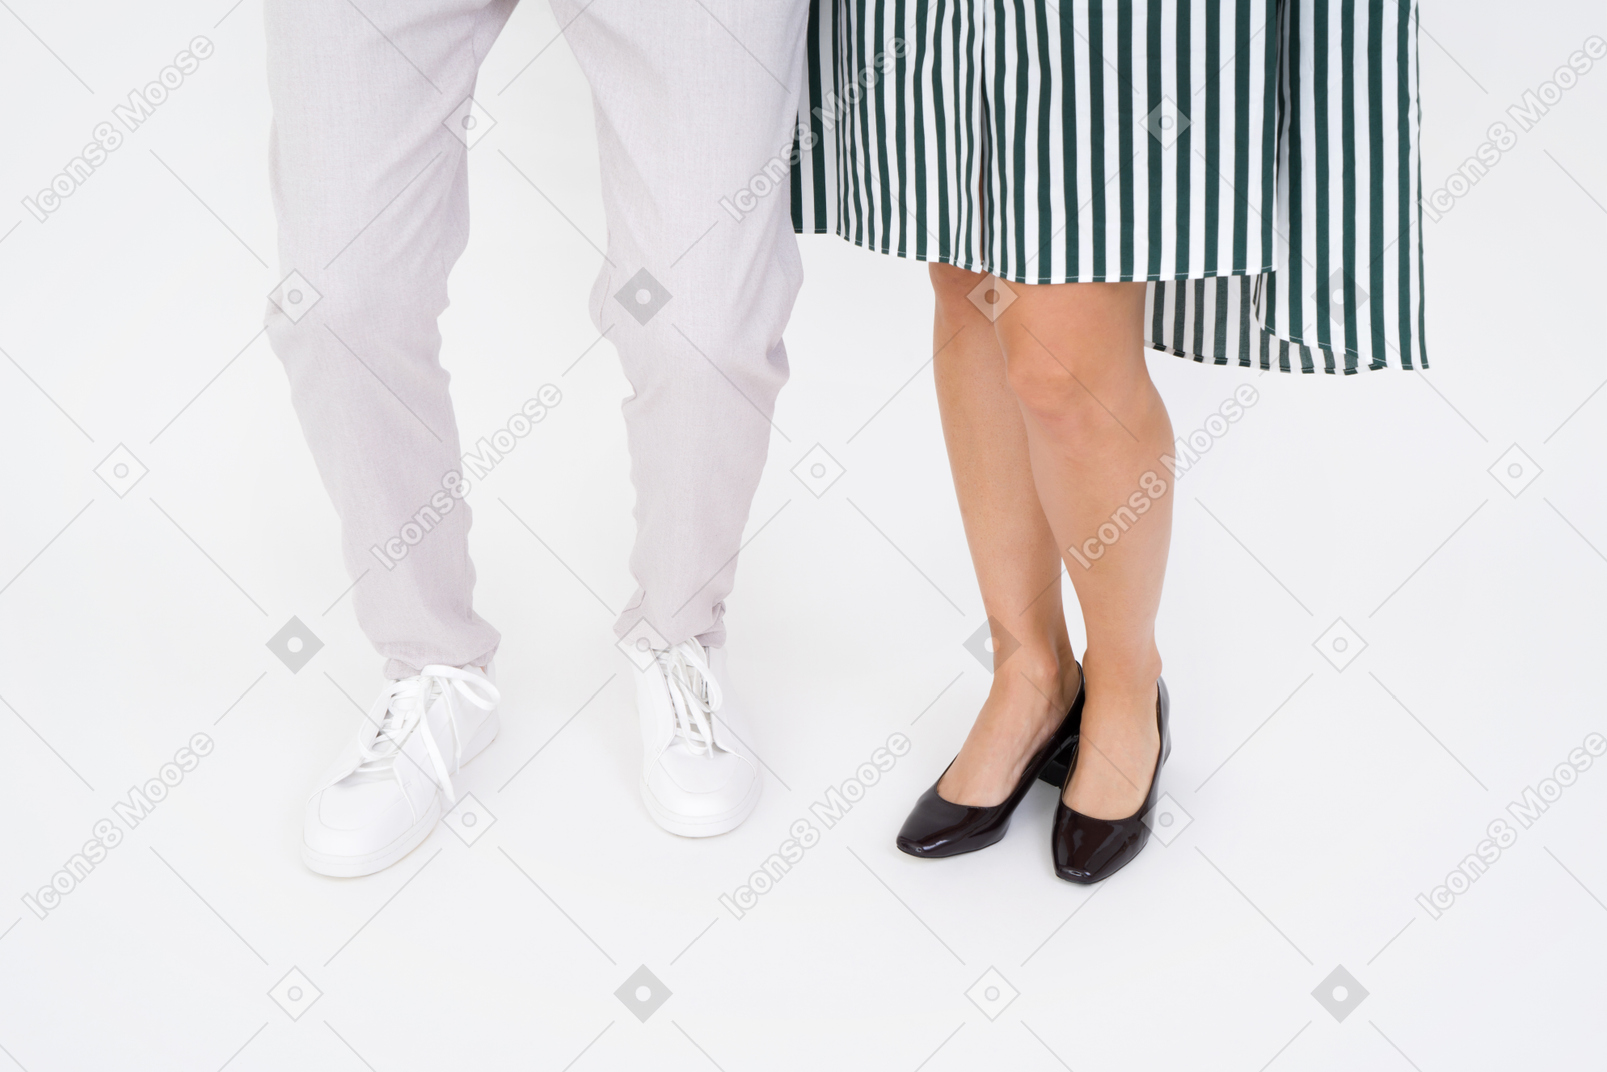 Couple's legs standing close together